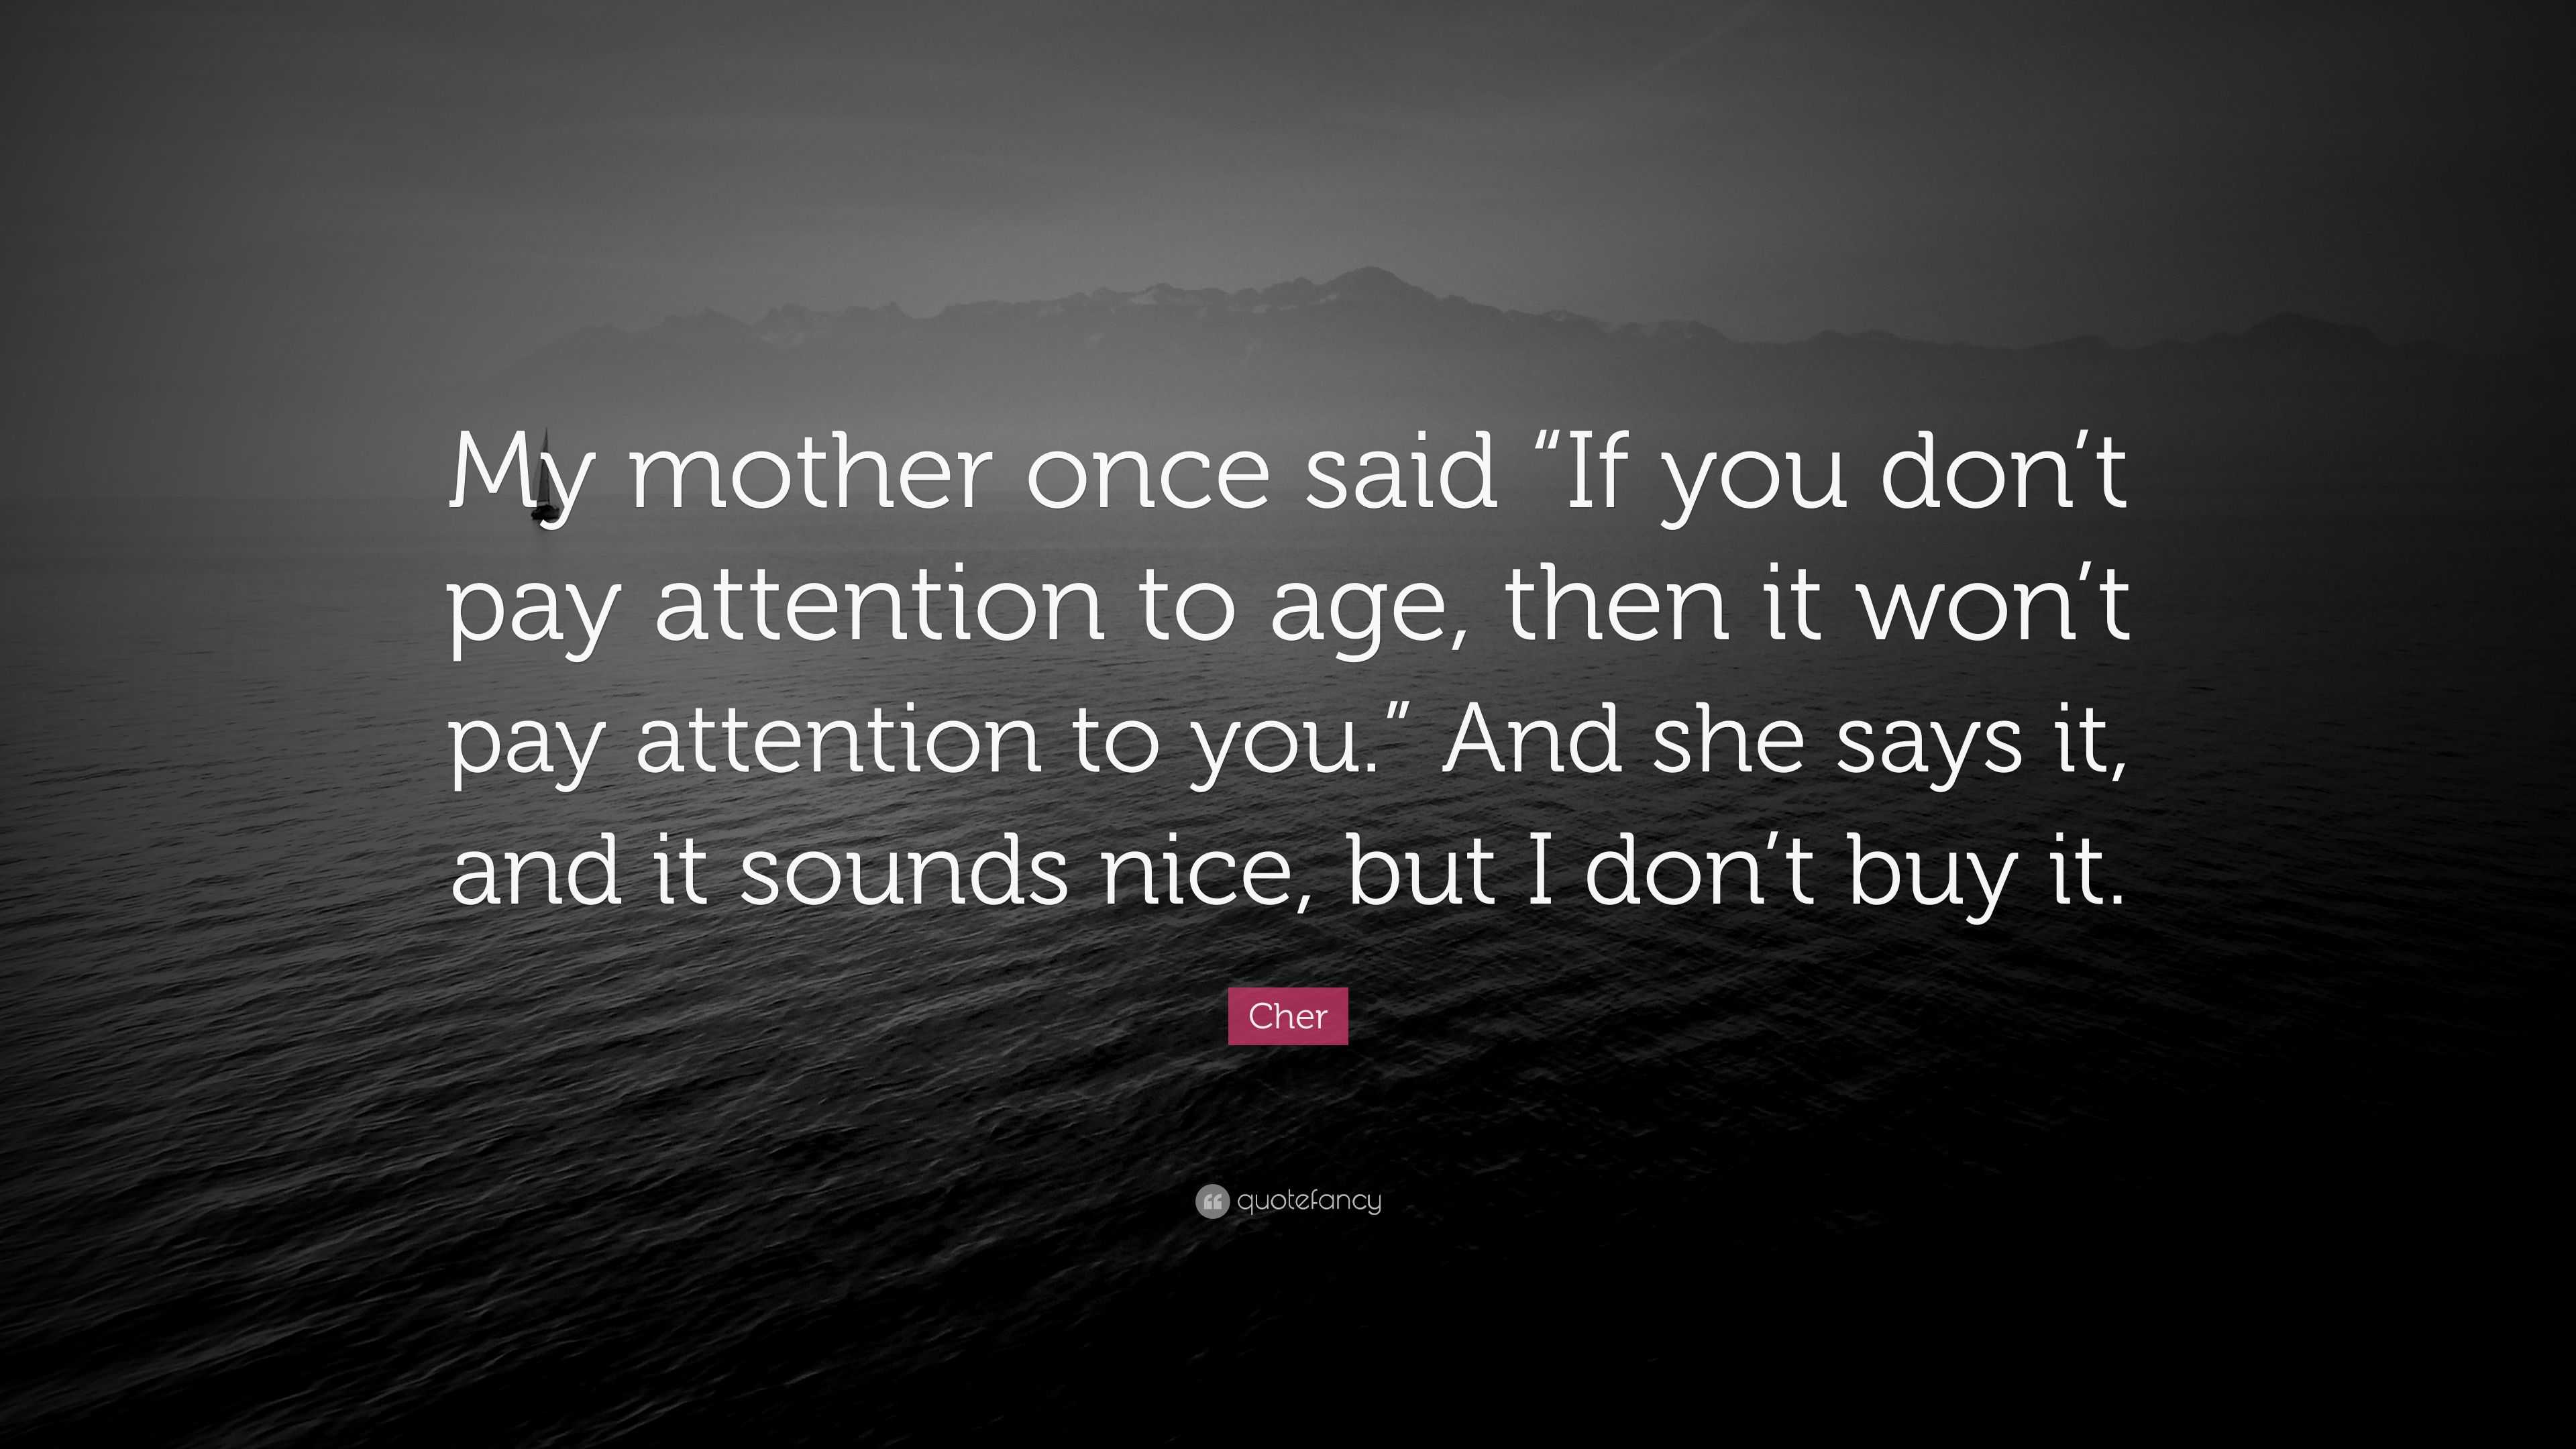 Cher Quote: "My mother once said "If you don't pay attention to age, then it won't pay attention ...